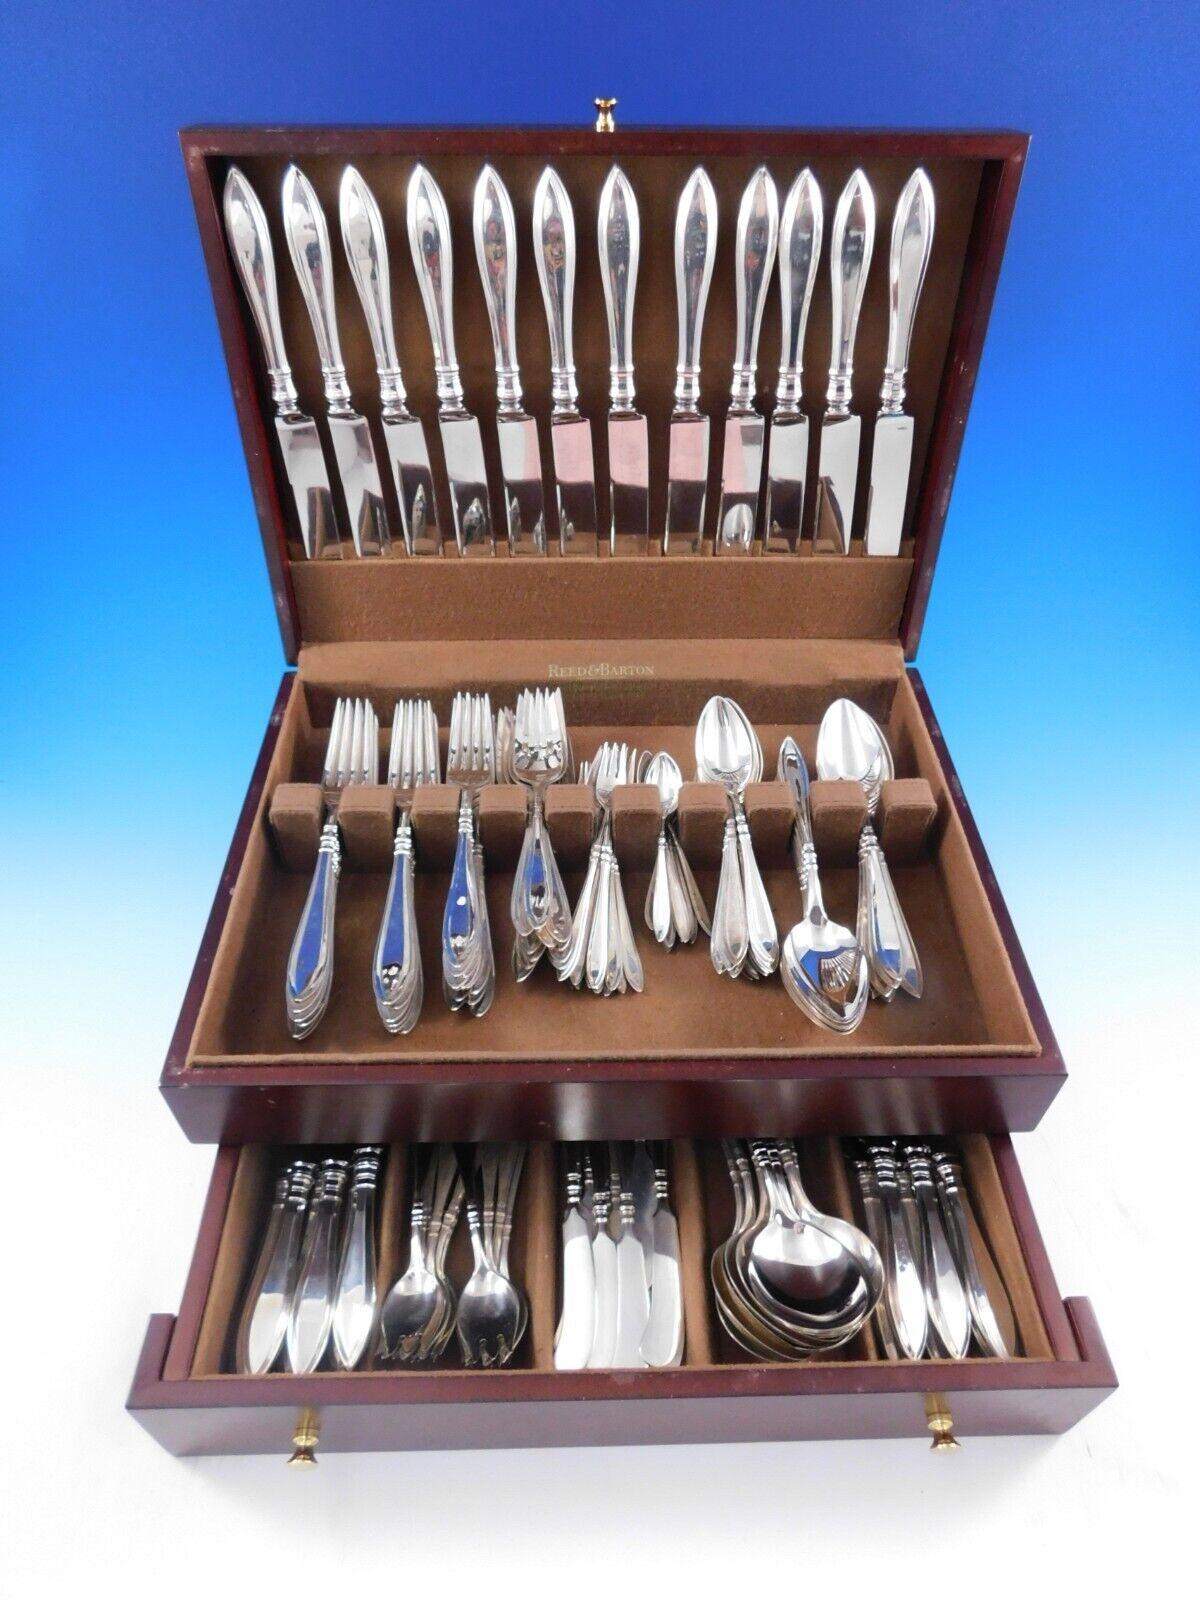 Monumental Portsmouth by Gorham sterling silver flatware set -  pieces. This pattern features a timeless modern pointed unadorned handle design. This set includes:

12 Dinner Size Knives w/blunt plated blades, 9 7/8